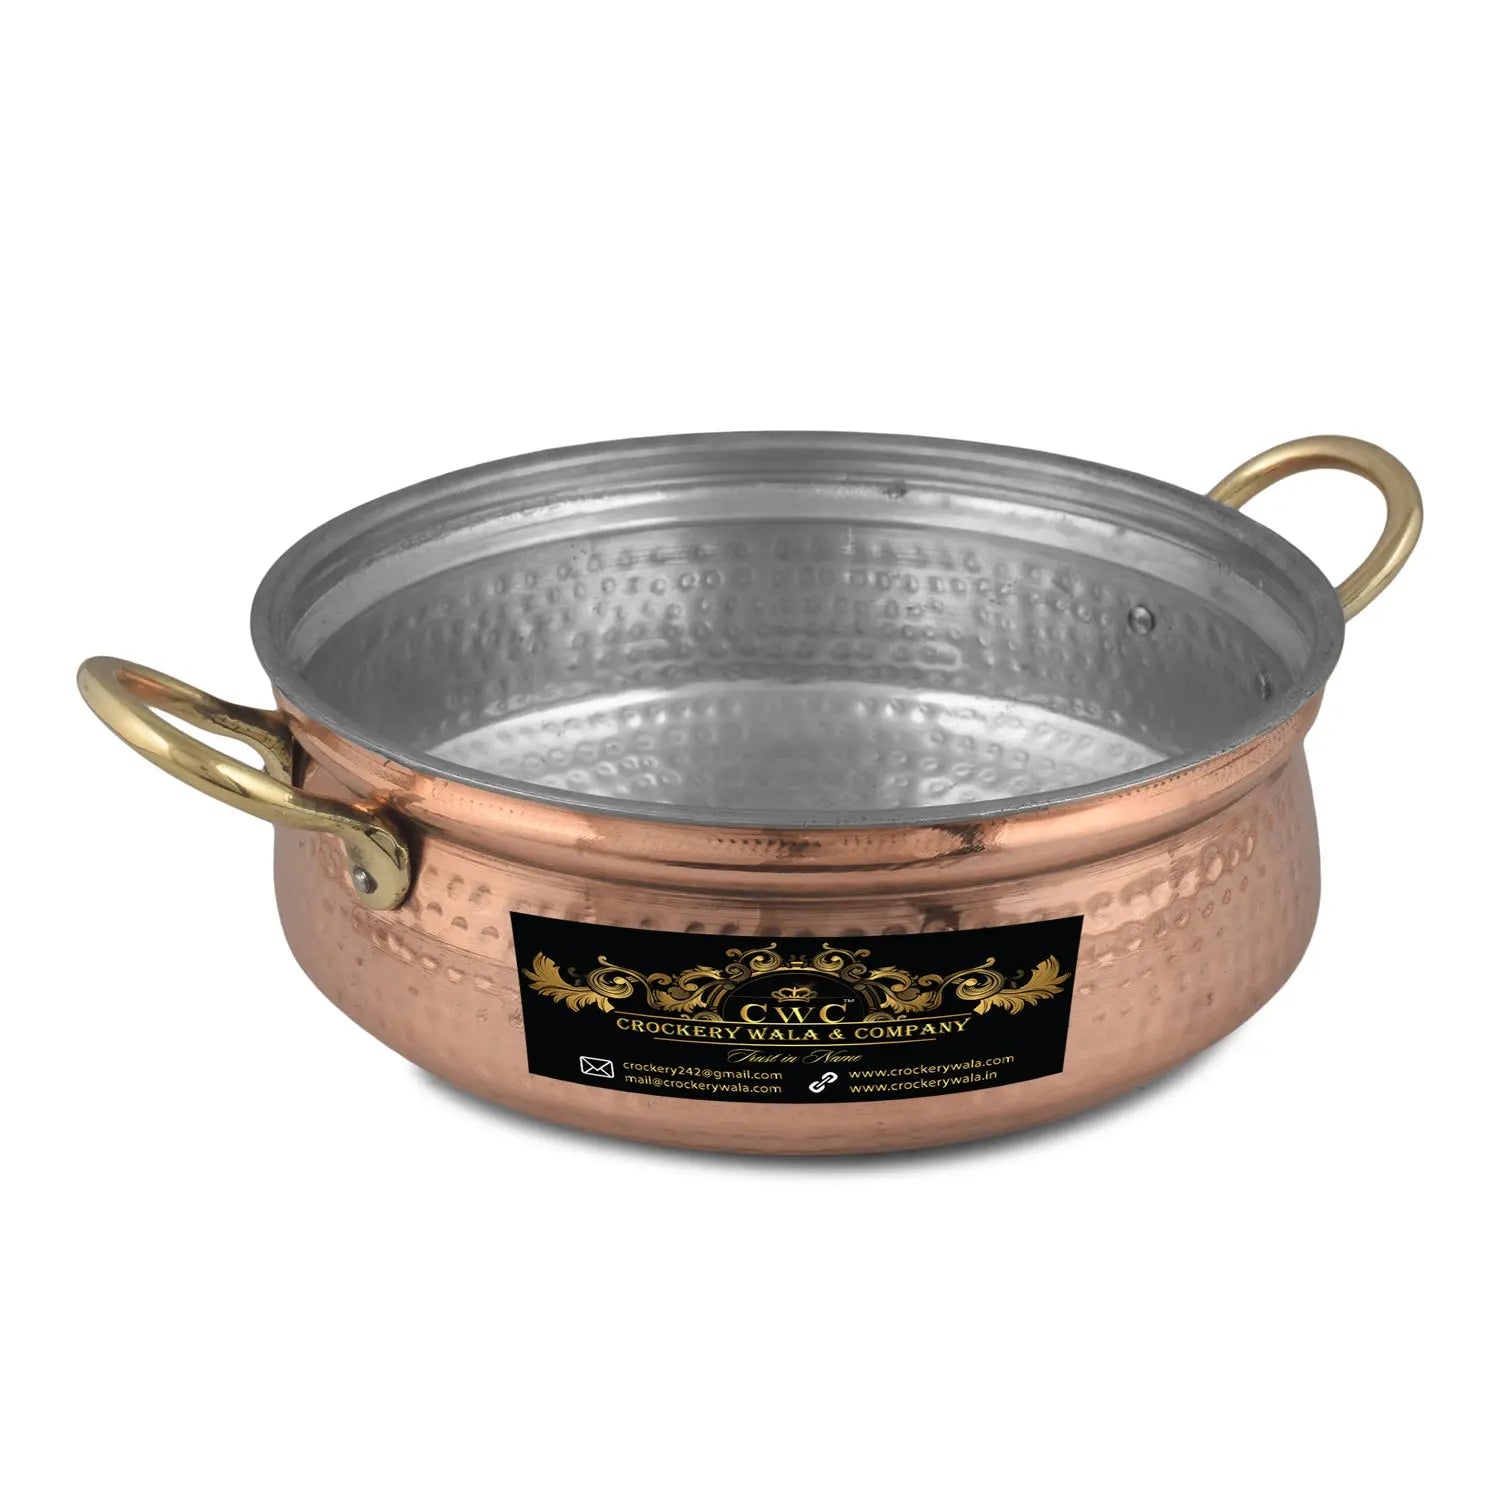 Crockery Wala And Company Pure Copper Kalai Handi For Serving & Cooking Pure Copper Hammered Handi With Brass Handles || 9" Inches - CROCKERY WALA AND COMPANY 